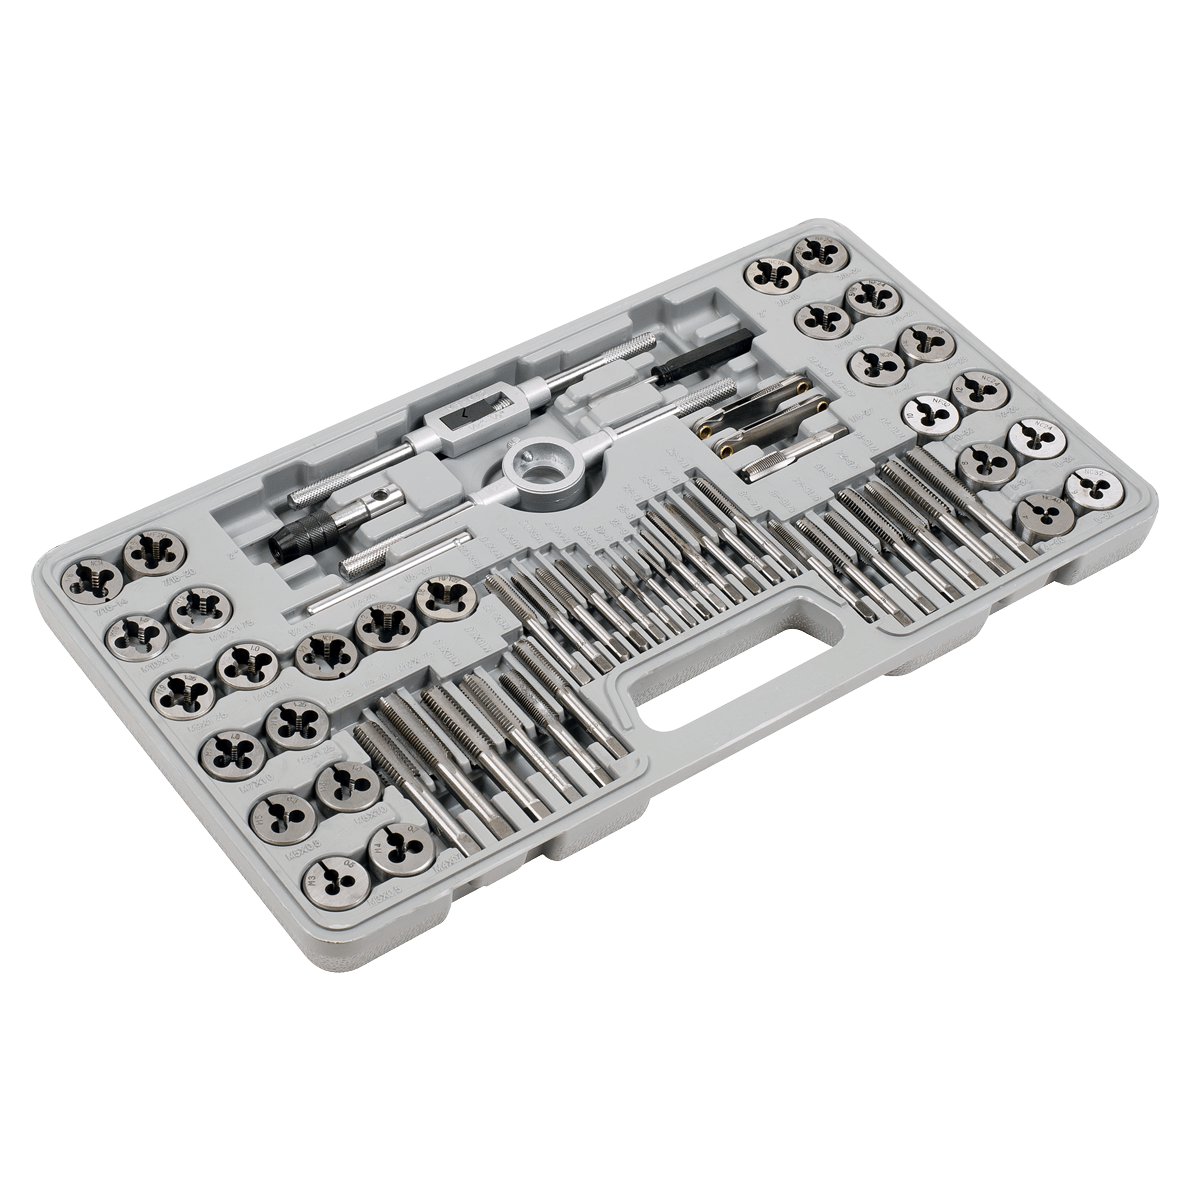 Tap & Die Set Metric & Imperial 60pc | High quality alloy steel taps and dies.¥ Set features both Metric and Imperial sizes. | toolforce.ie